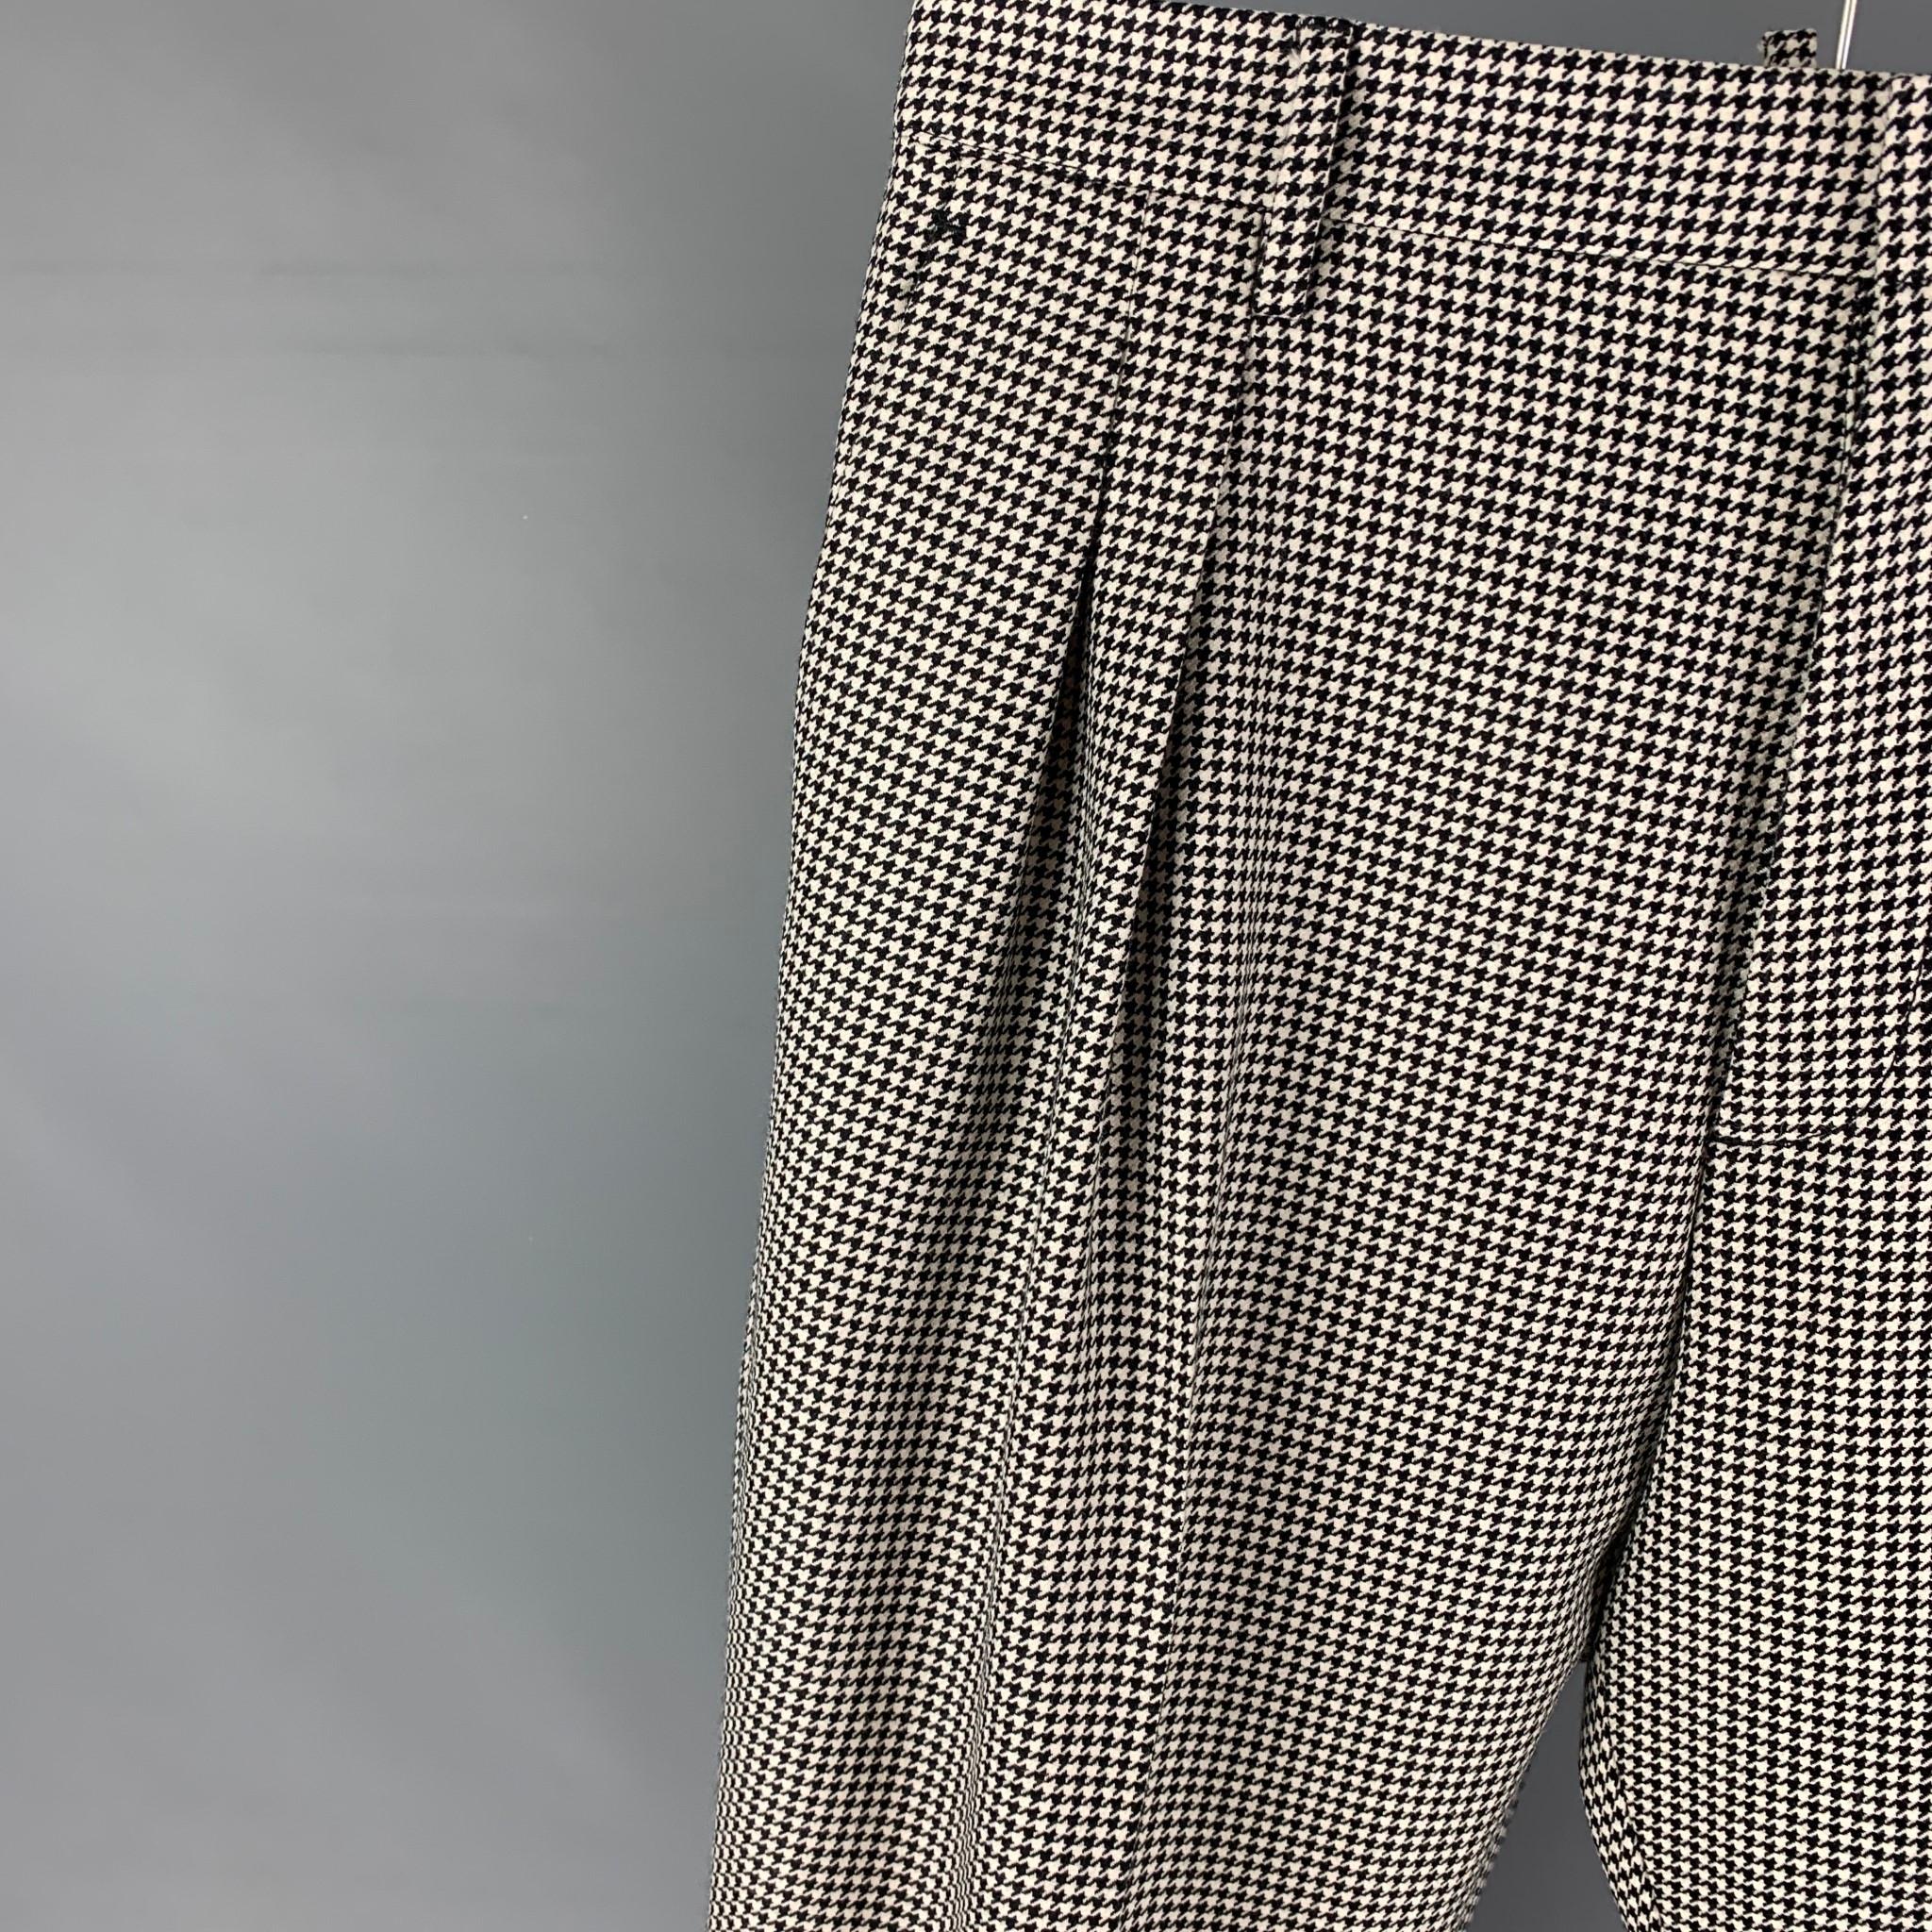 DSQUARED2 dress pants comes in a black & white houndstooth lana wool featuring a pleated style, high waisted, cuffed leg, front tab, and a button fly closure. Made in Italy. 

Very Good Pre-Owned Condition. Minor repair at leg. As-is.
Marked: IT 52